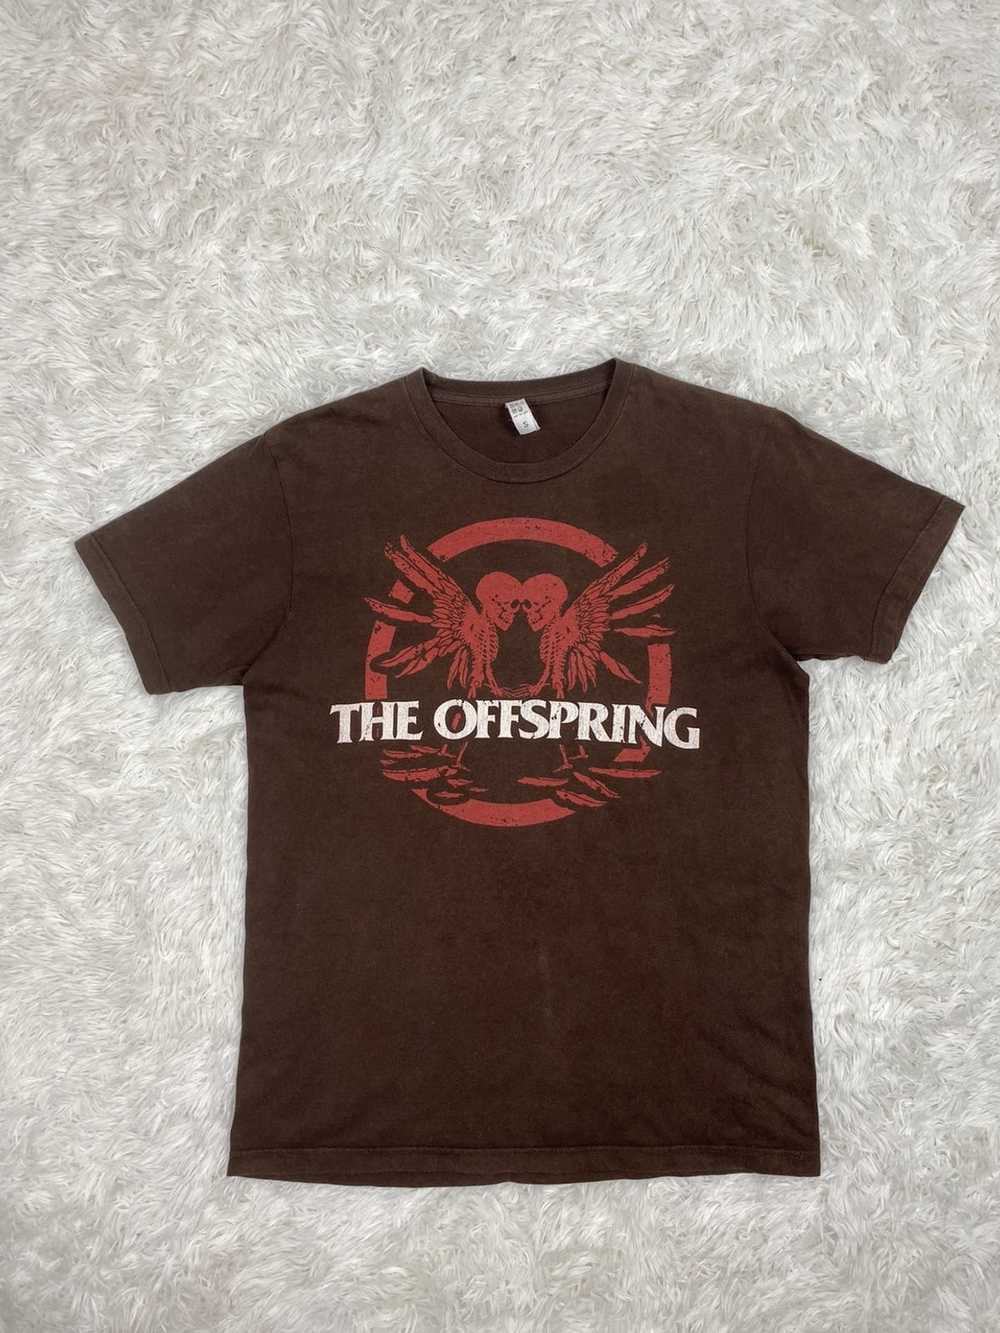 Band Tees × Vintage THE OFFSPRING TOUR 2008 AUTHE… - image 1